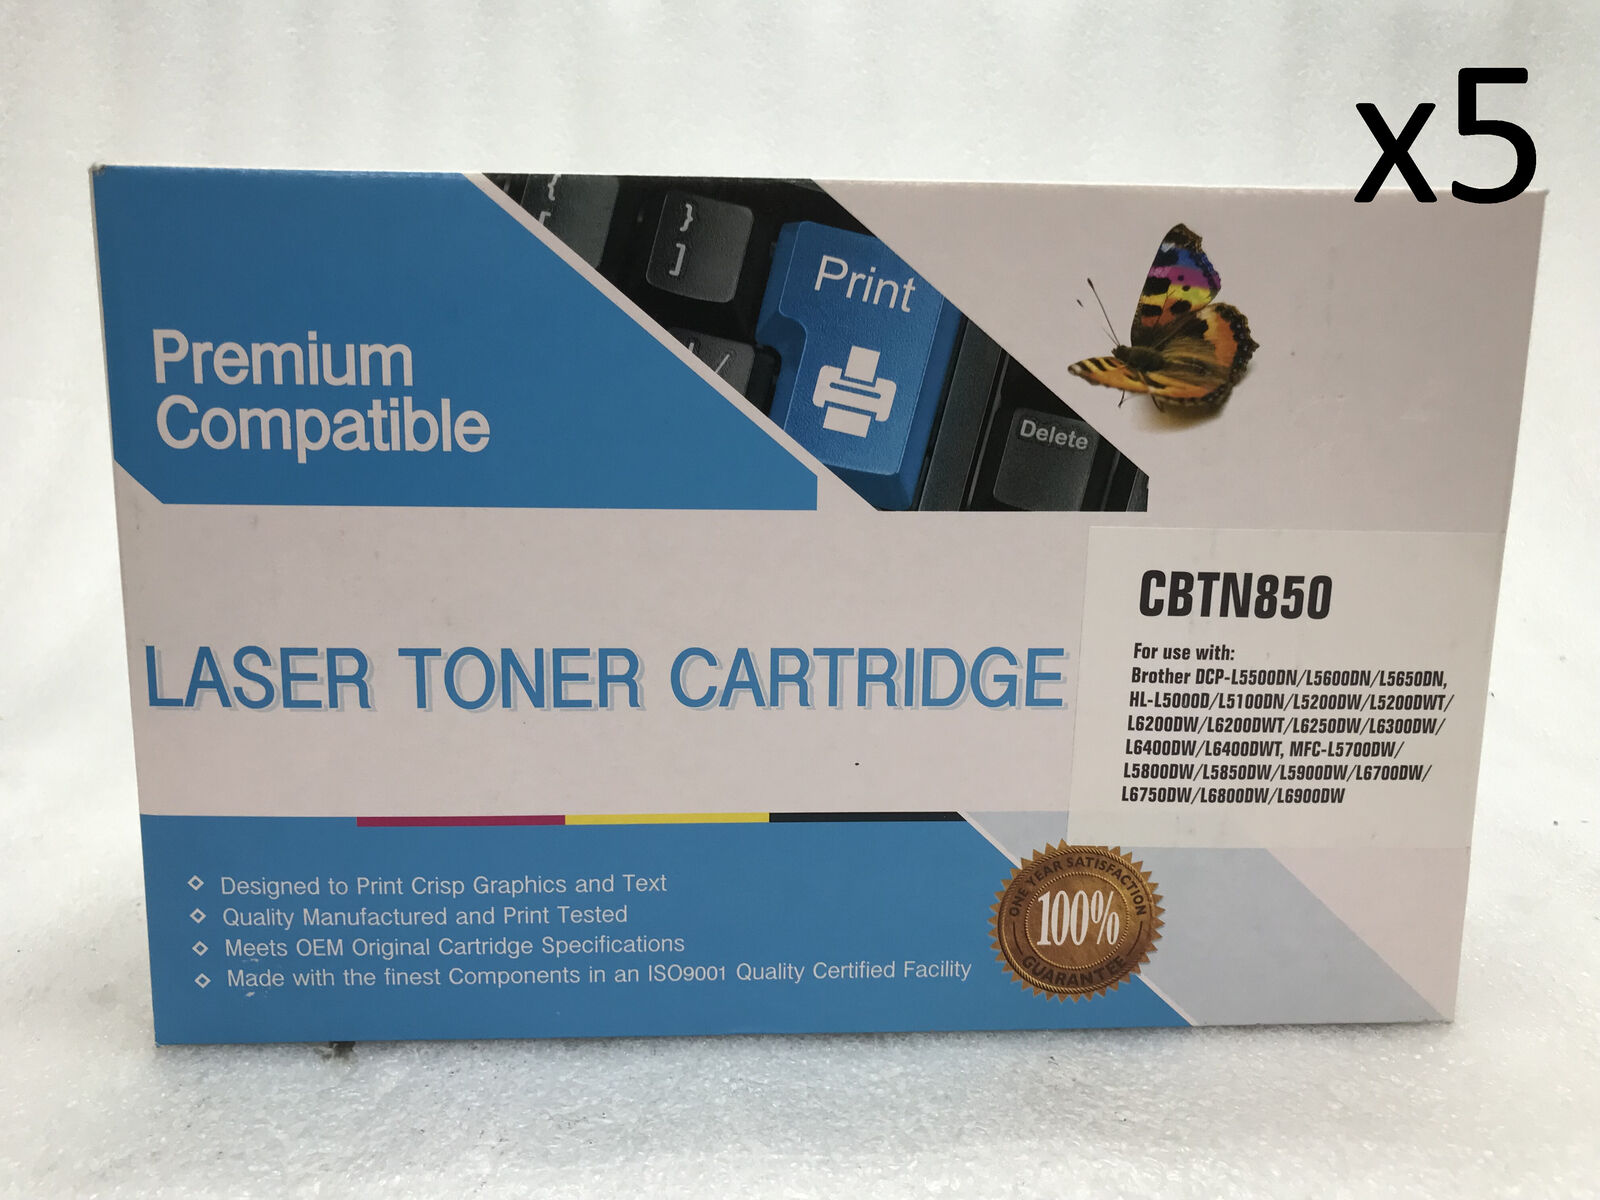 Lot of 5 New Sealed Premium Compatible CBTN850 Toner for Brother Series Printer